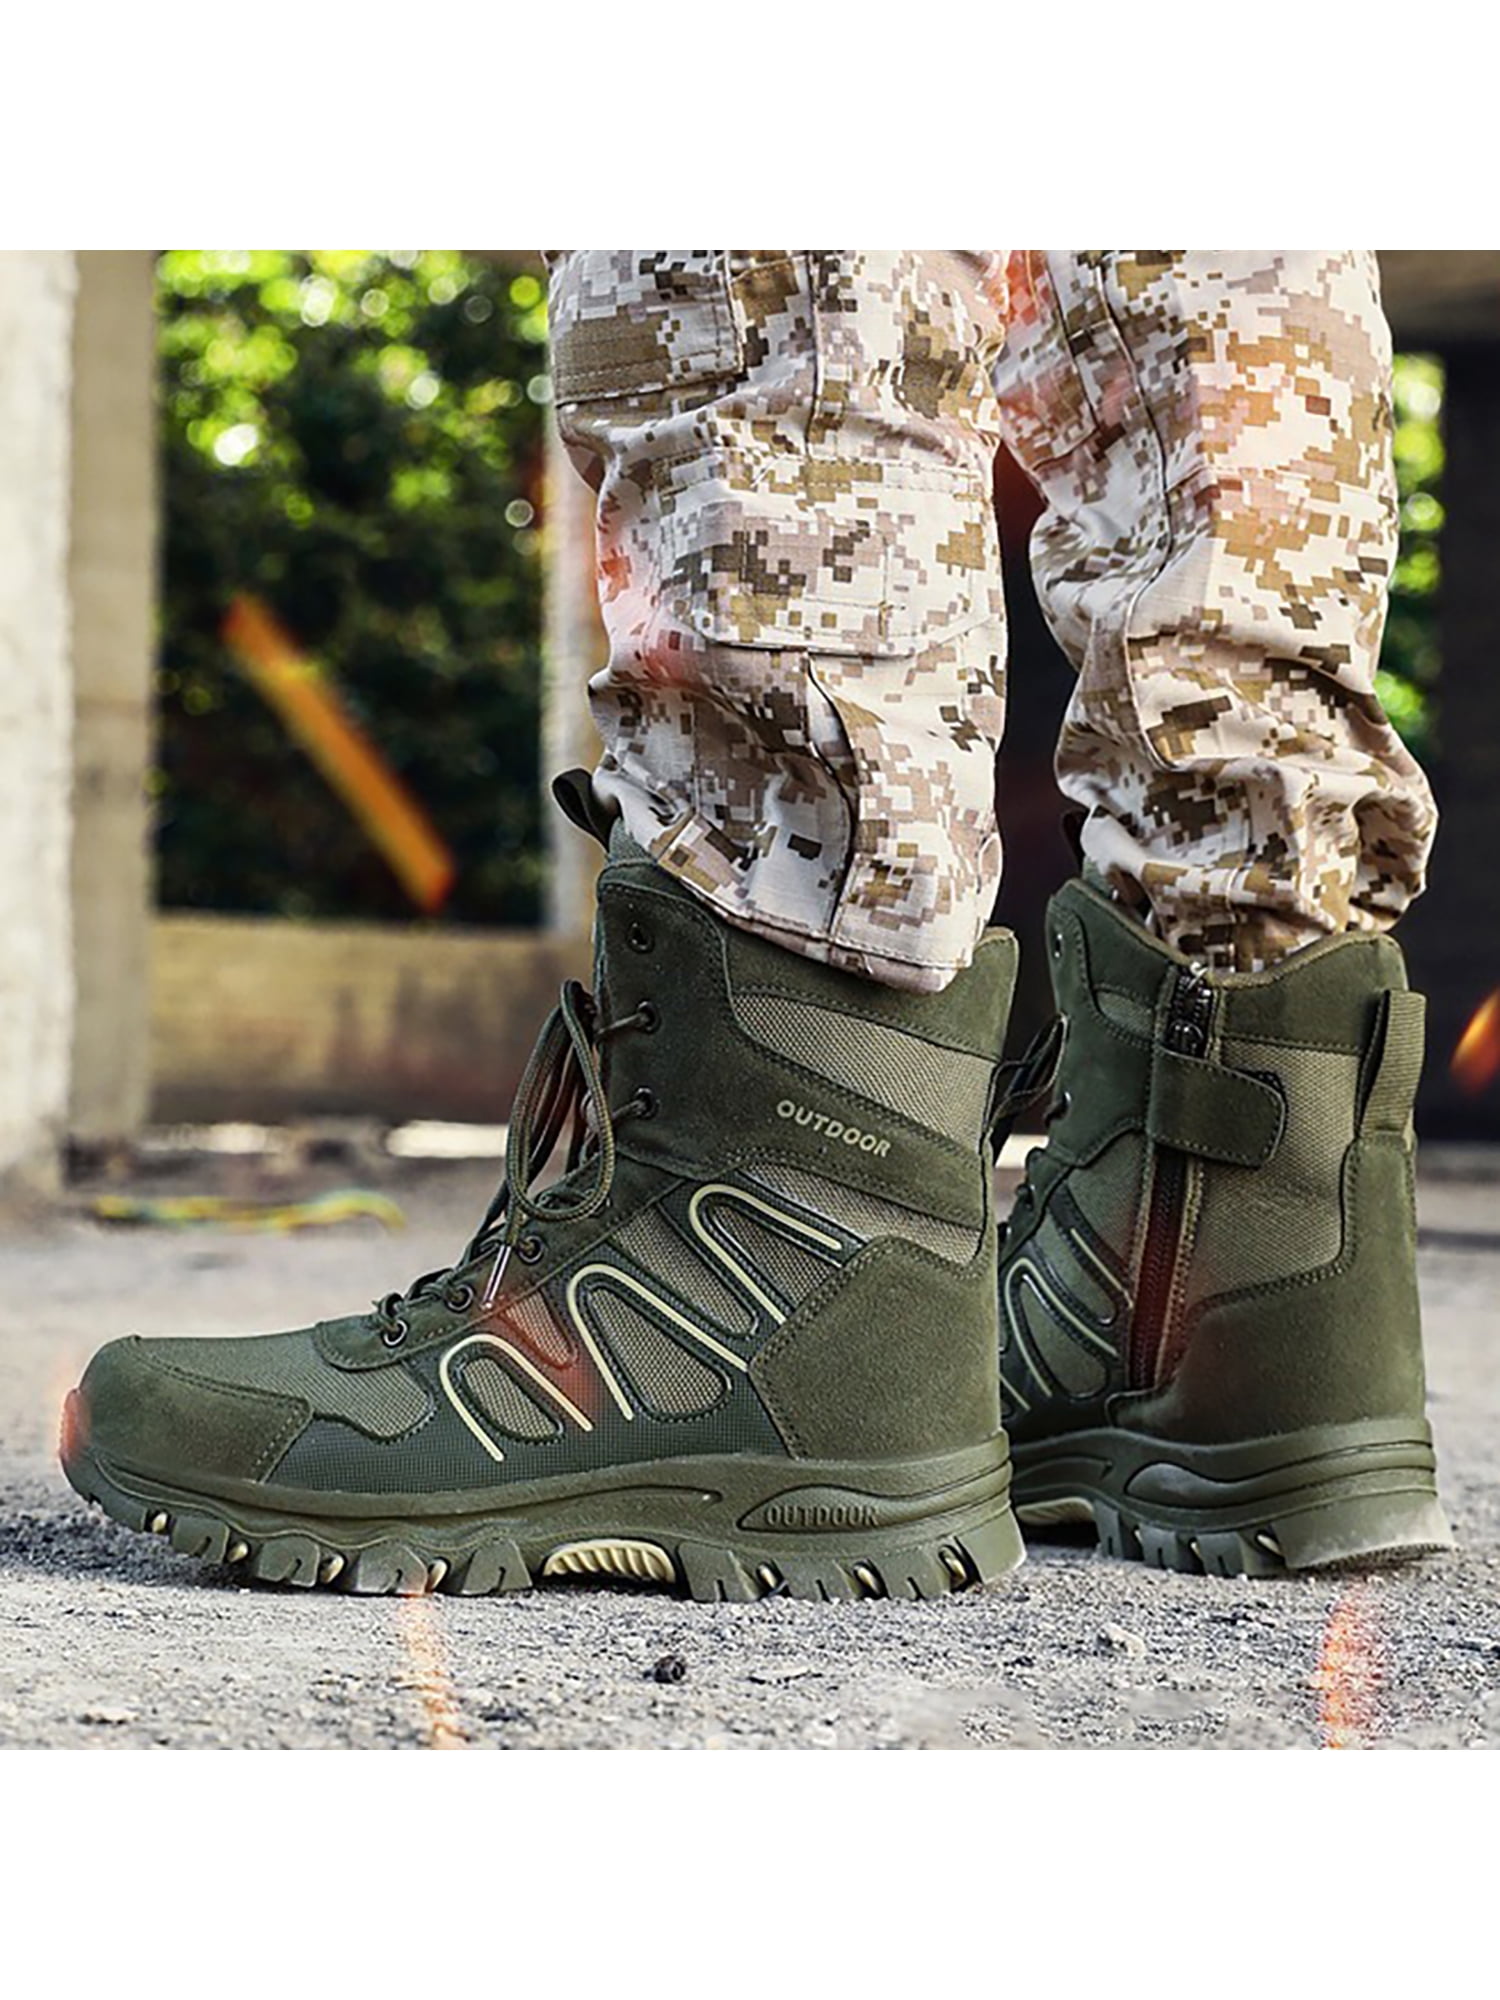 Outdoor Men's Tactical Hiking  Trail  Work Shoes Casual Waterproof Walking Boots 